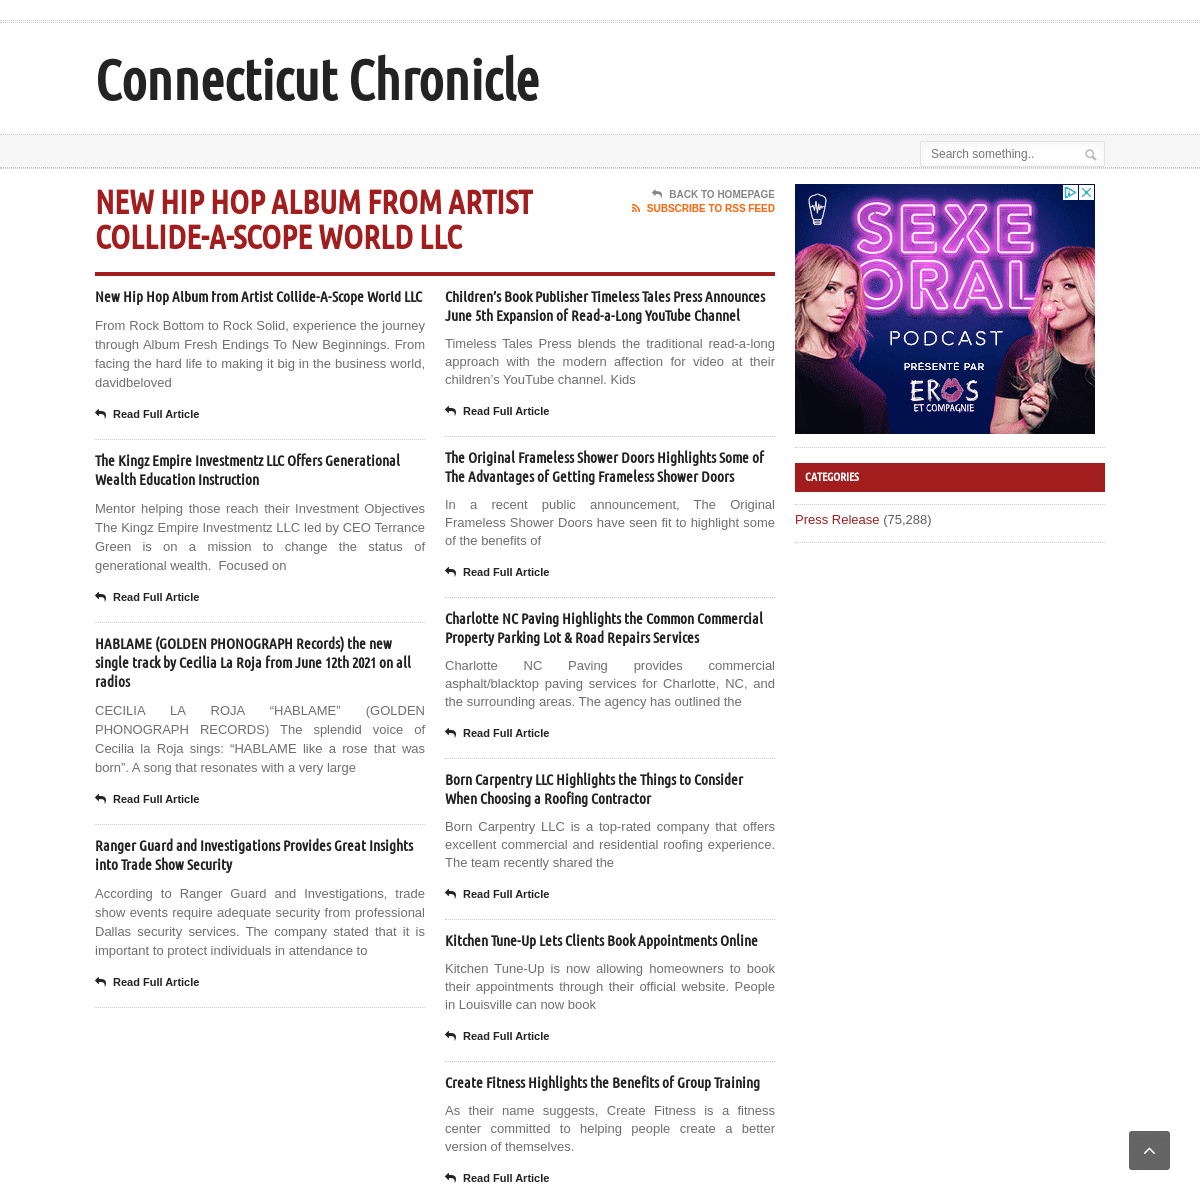 A complete backup of https://connecticutchronicle.com